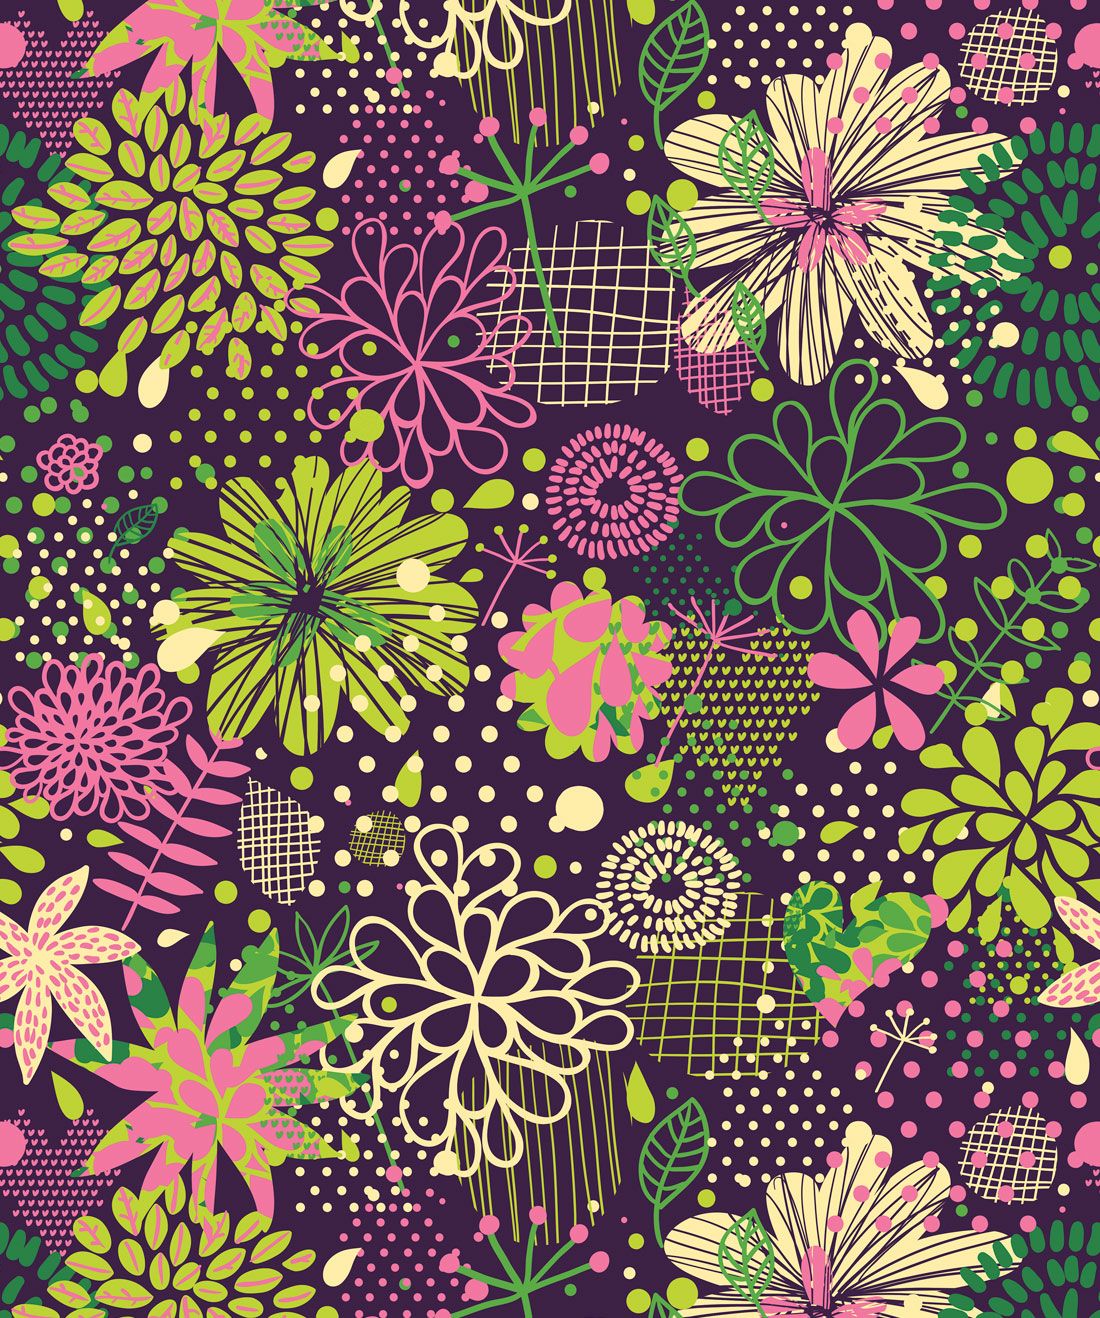 Neon Flowers Wallpaper, Bright, Funky & Totally Fun